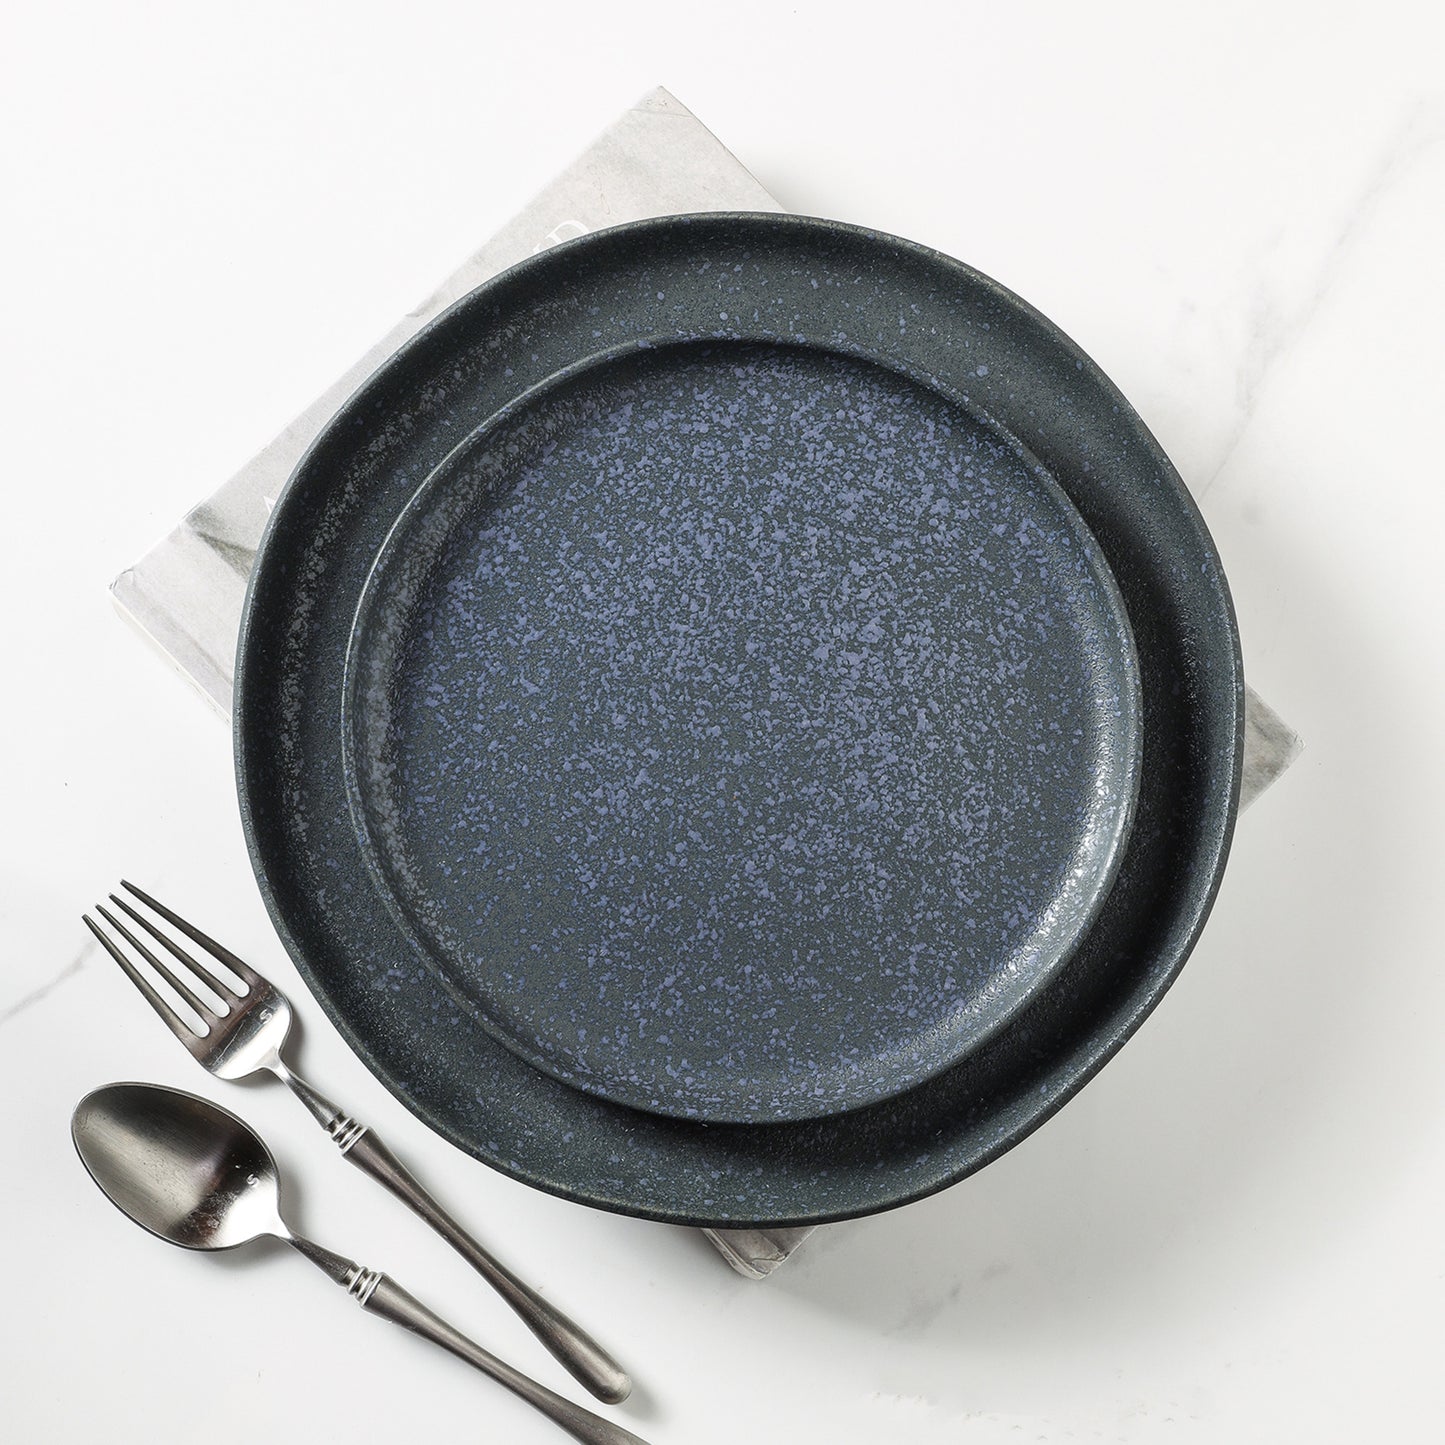 Tom Stoneware Salad Plate - Gray And Blue Reflection